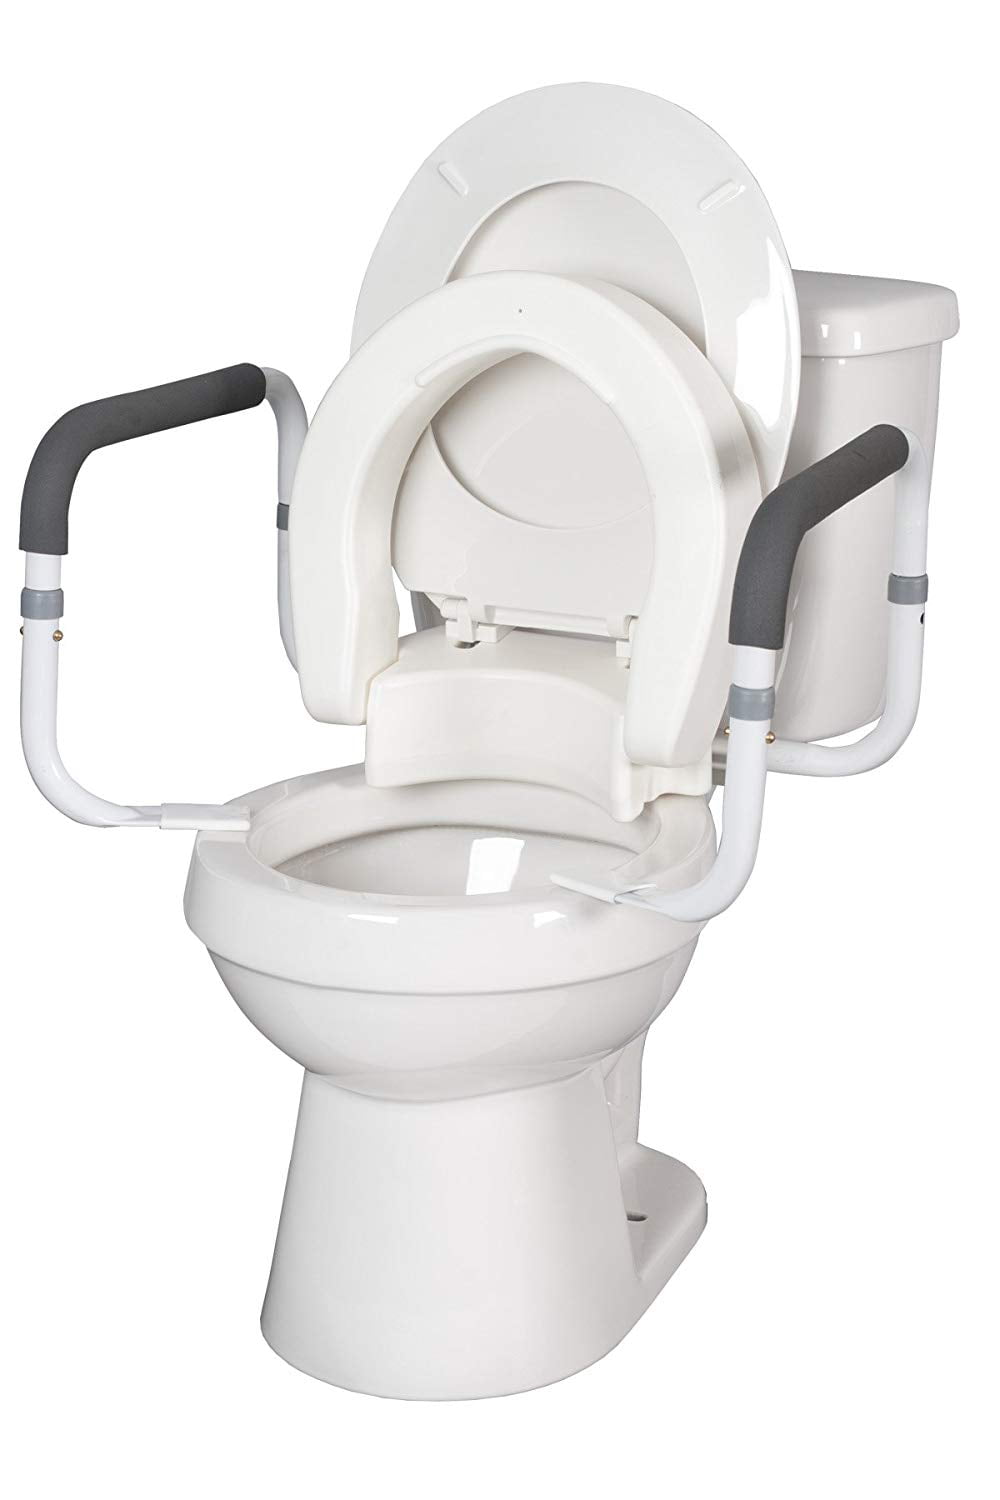 Elongated 19.5 x 14 x 3.5 Essential Medical  Elevated Toilet Seat with Arms 